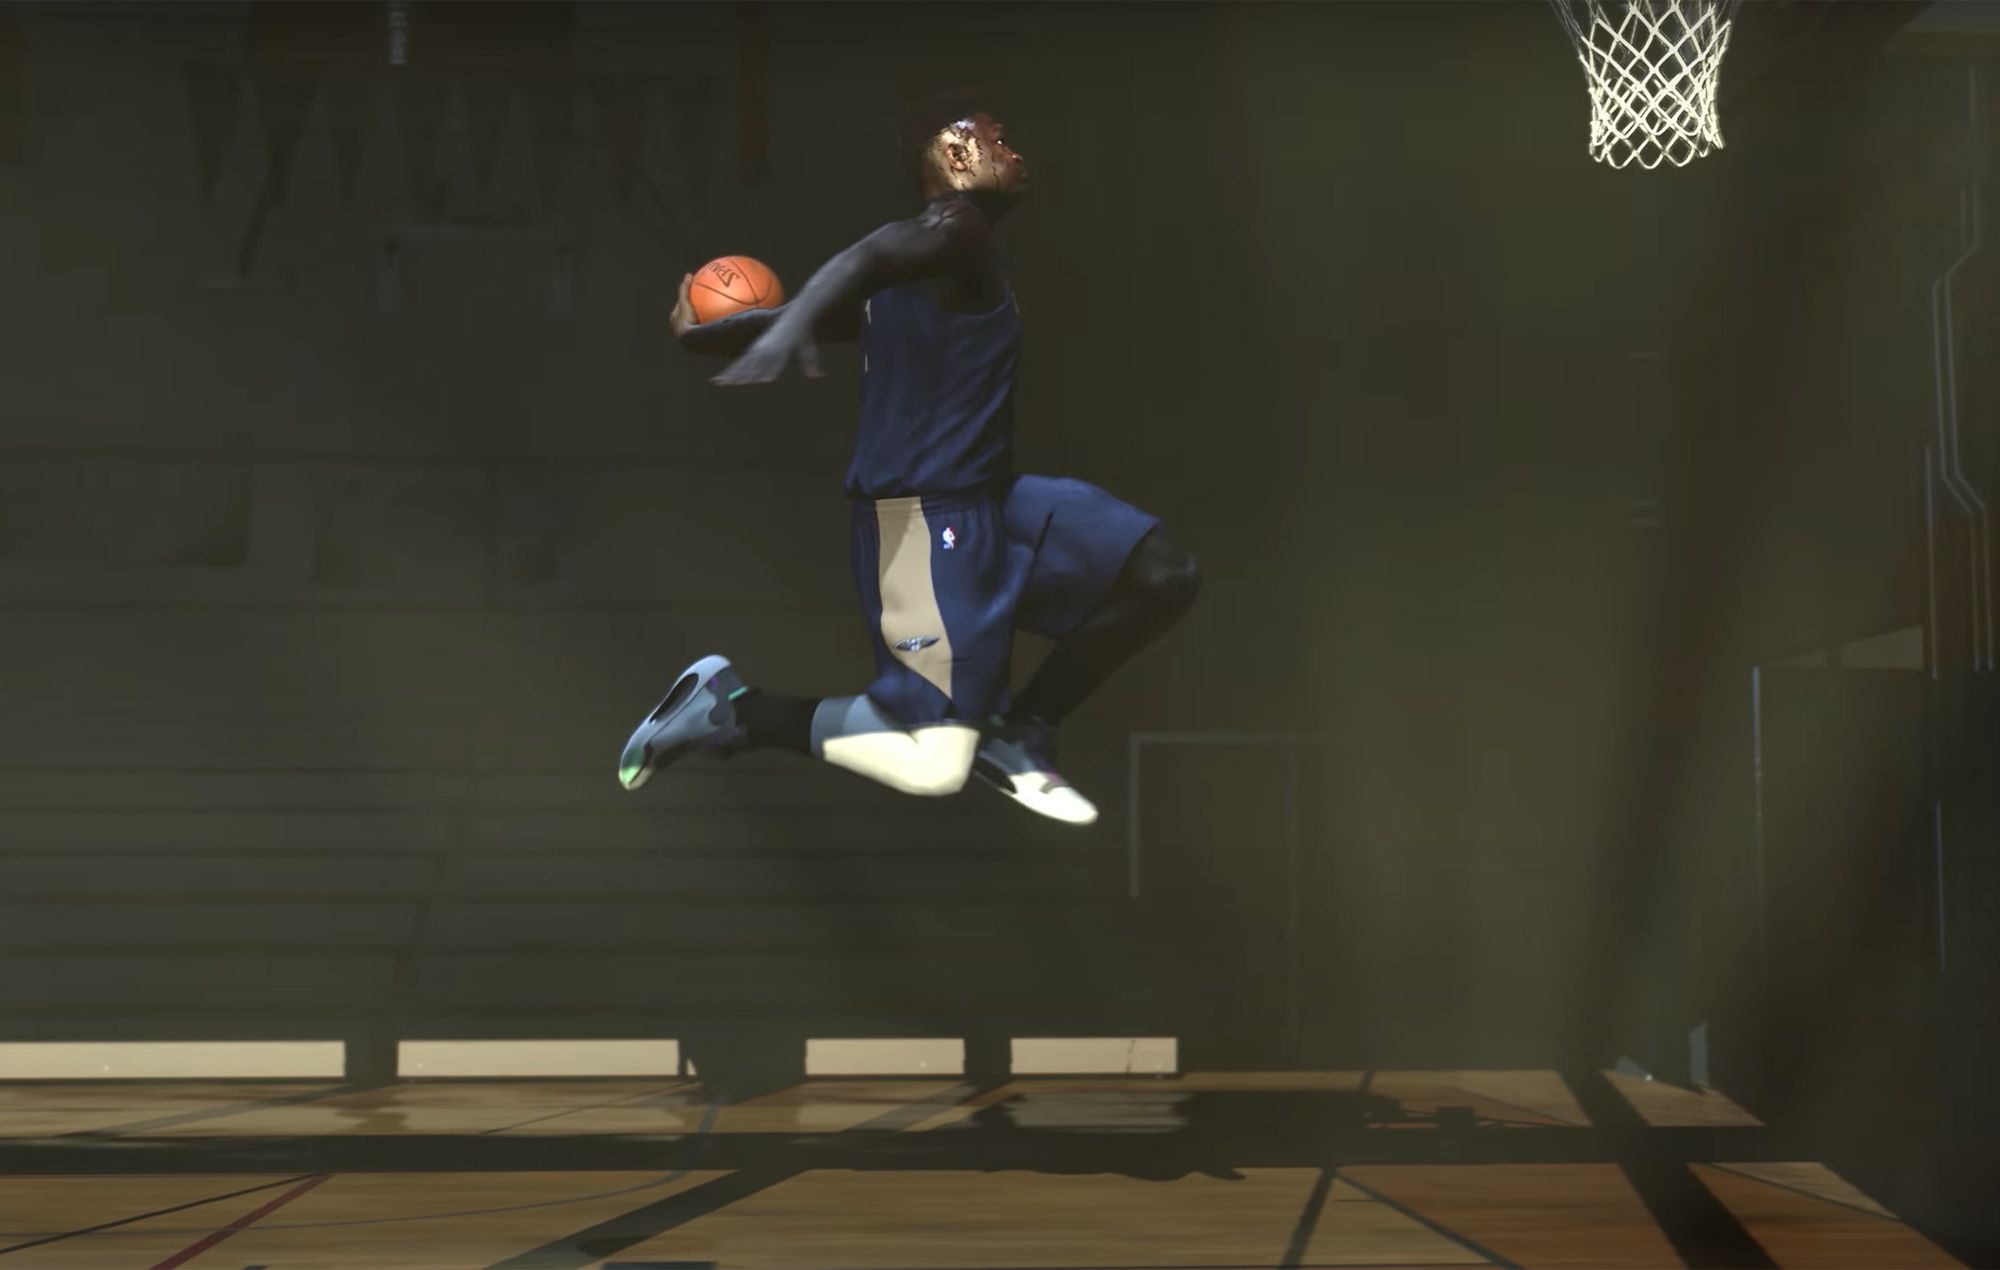 2K Games releases first footage of 'NBA 2K21' on PS5